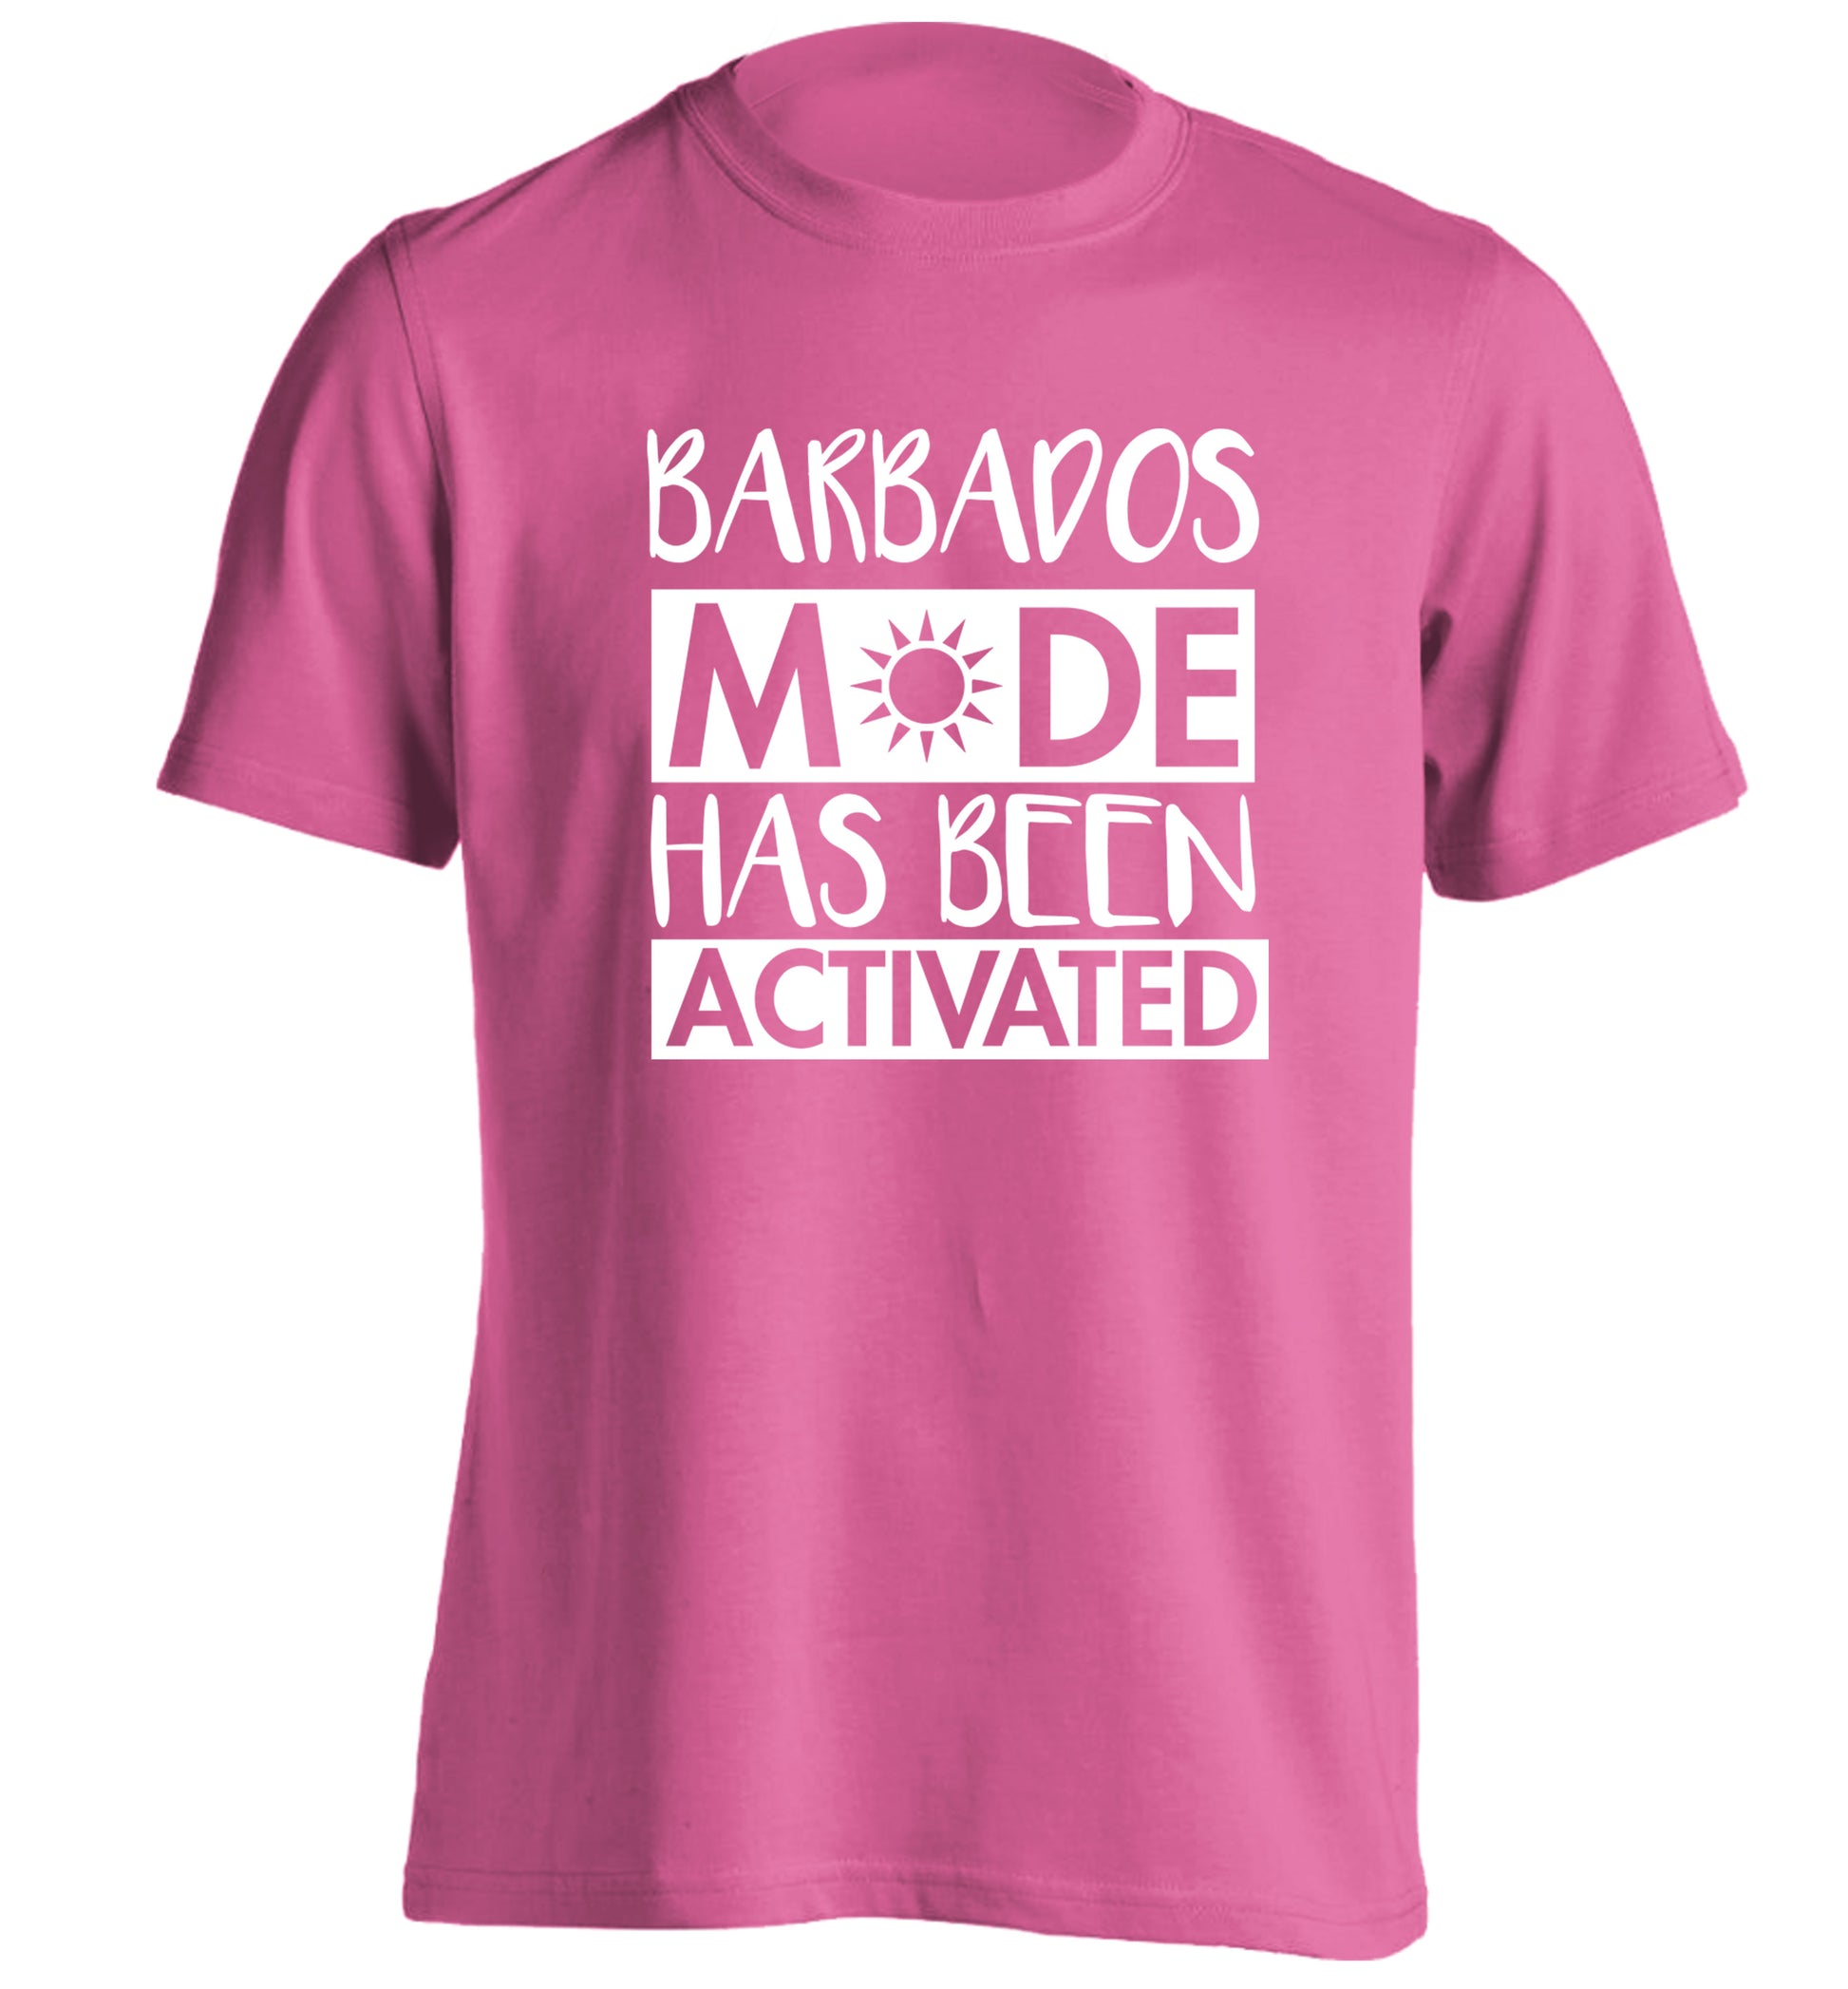 Barbados mode has been activated adults unisex pink Tshirt 2XL